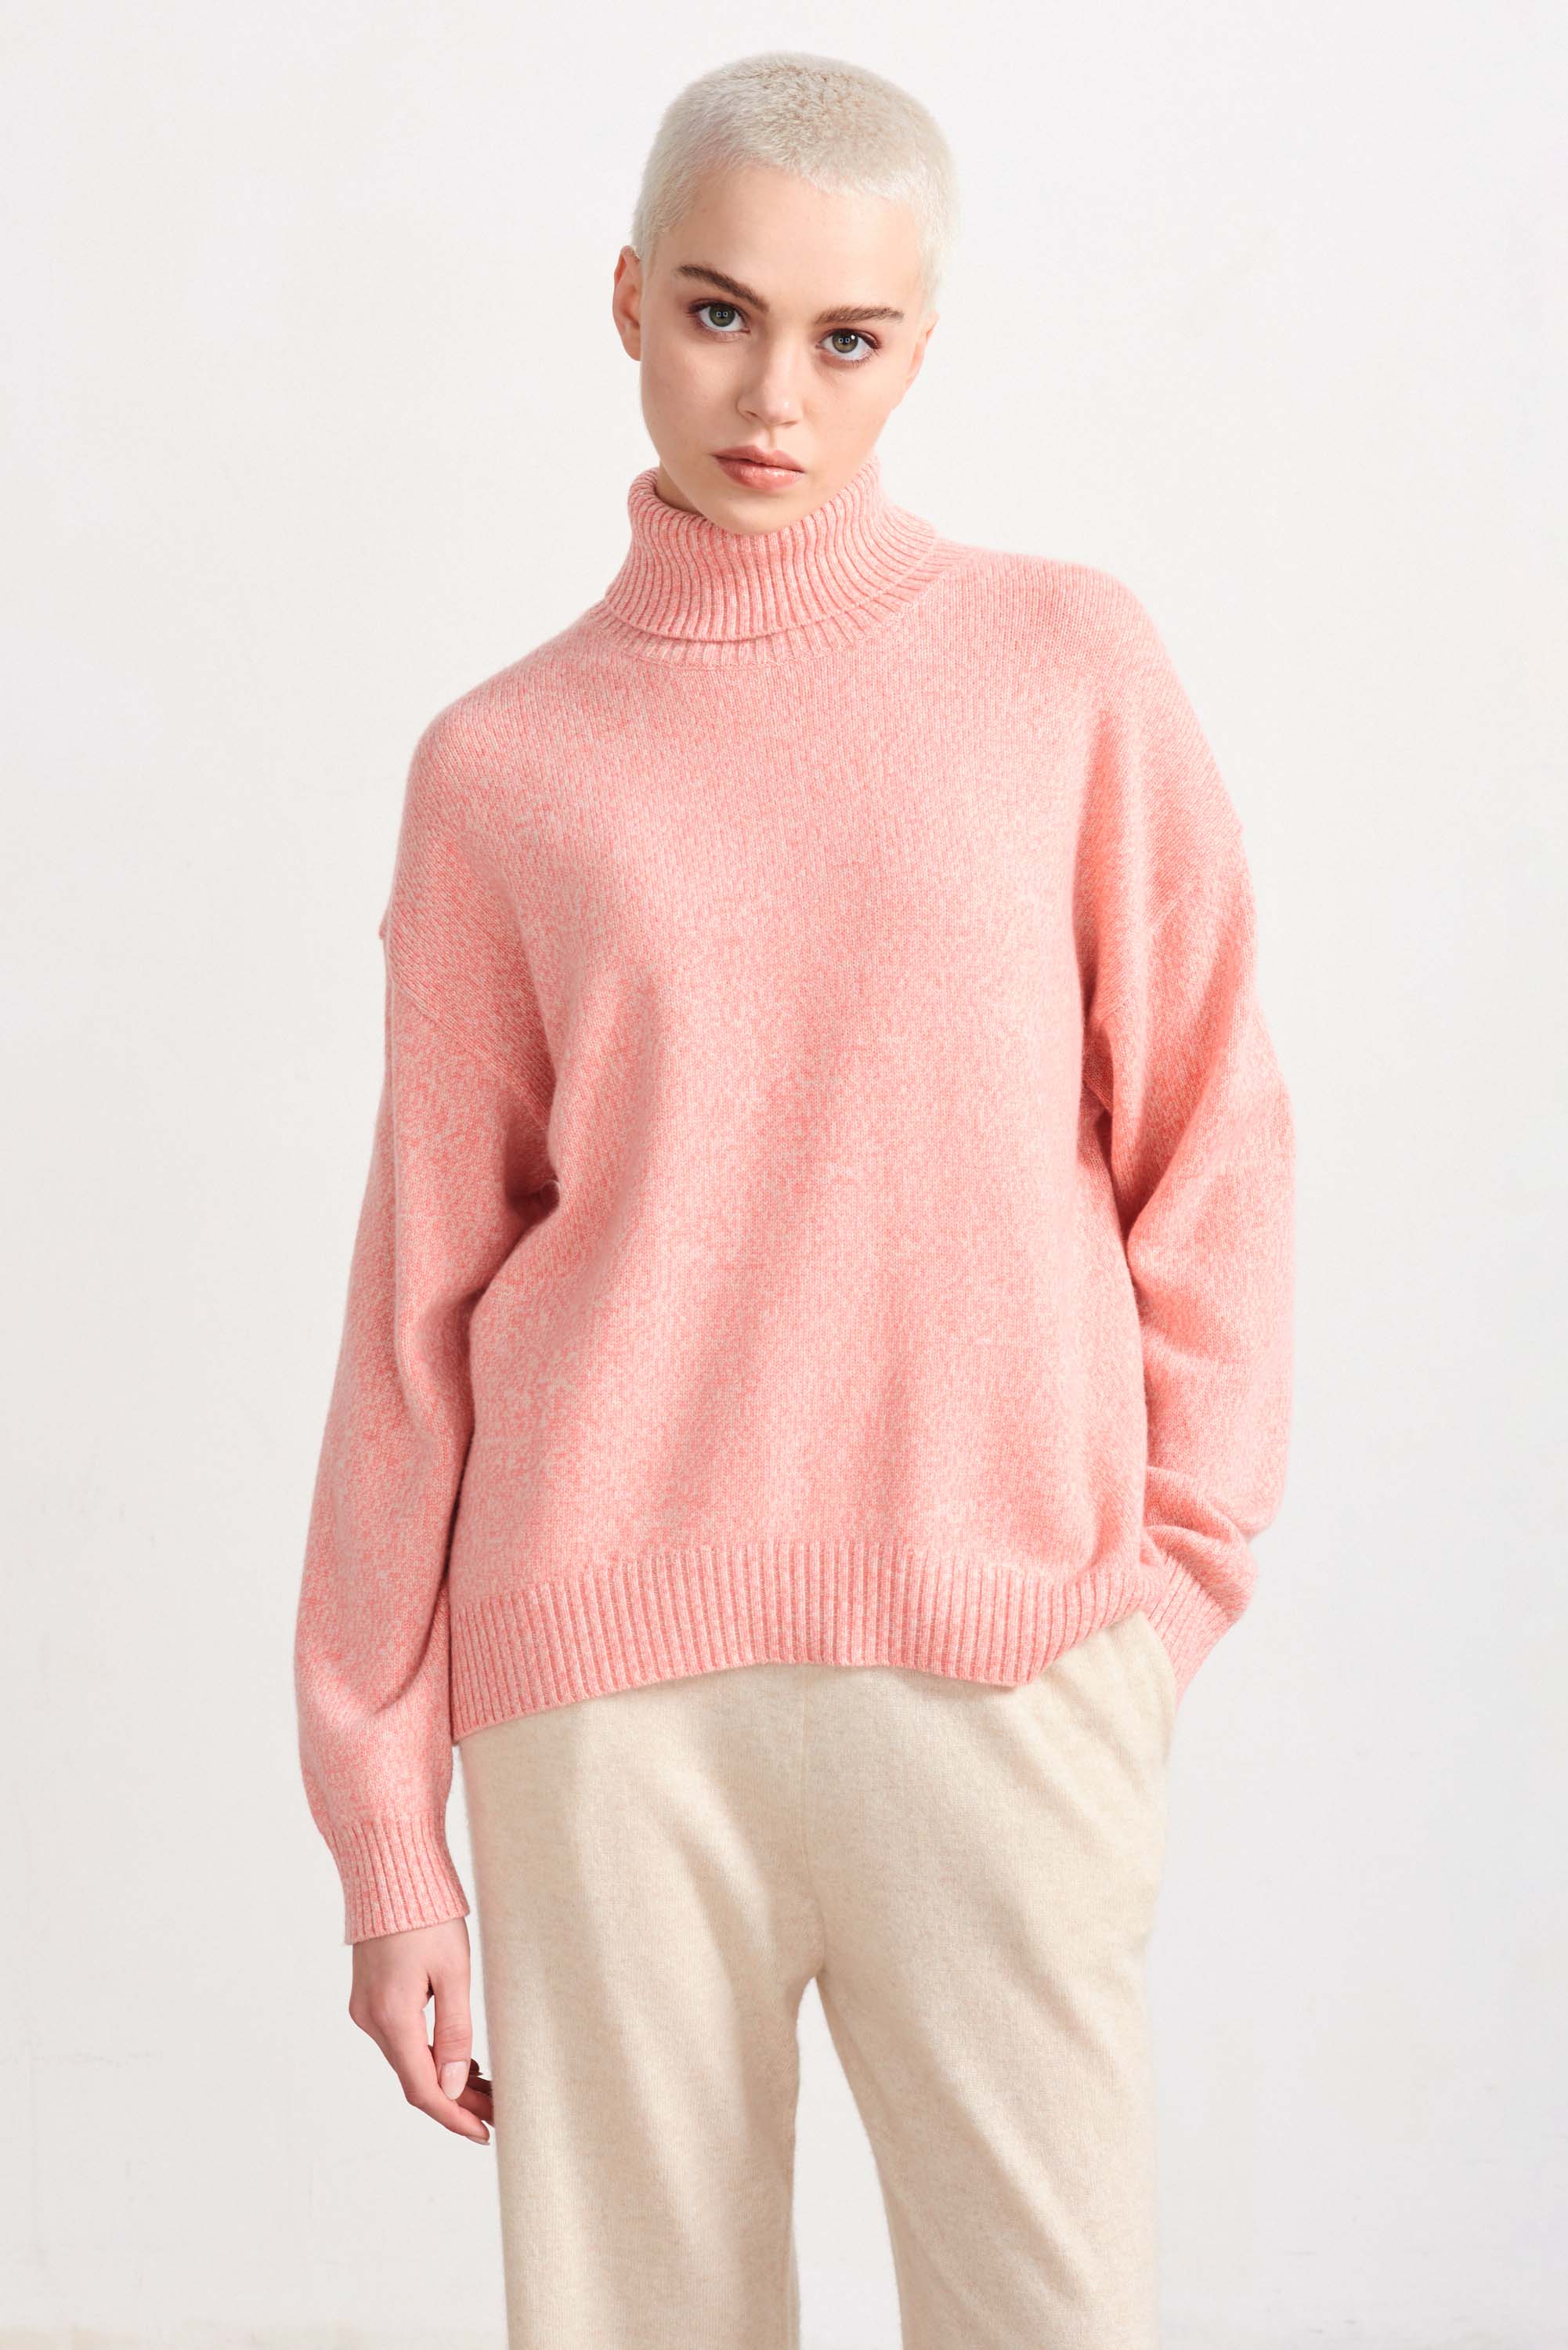 Blonde female model wearing Jumper 1234 cashmere and wool heavier weight oversized roll neck jumper in coral marl